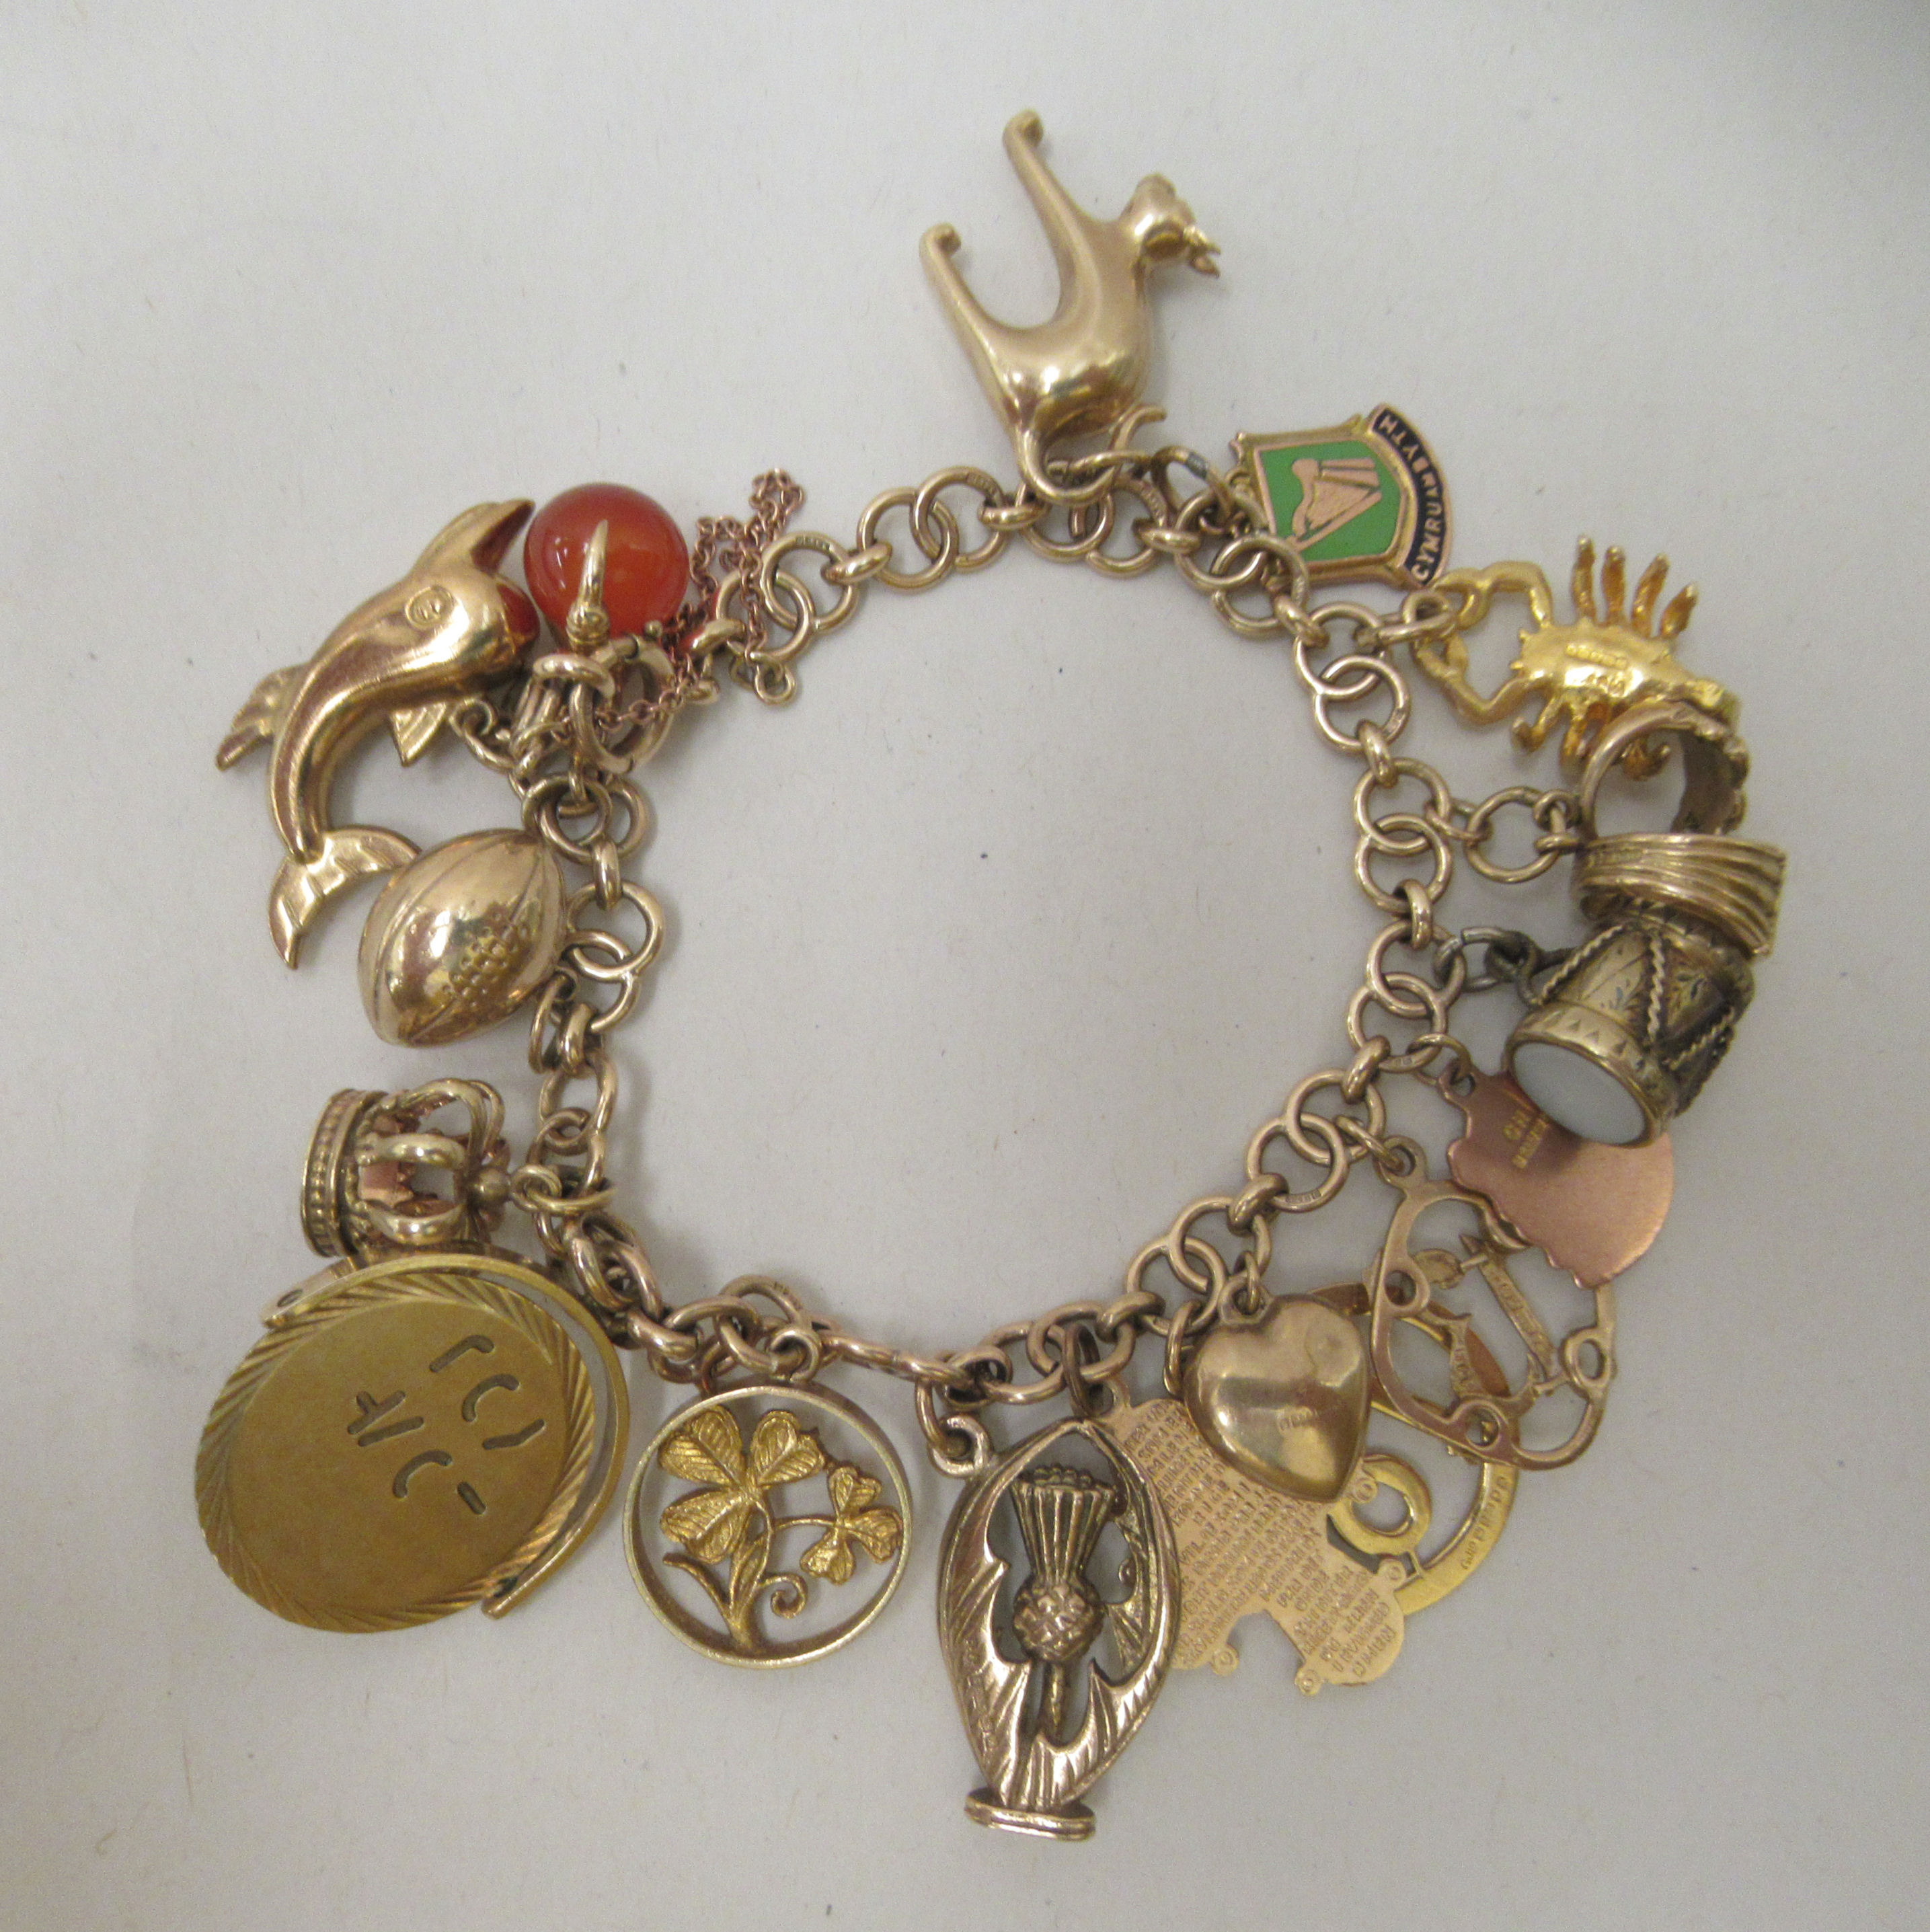 A 9ct gold and yellow metal charm bracelet with various charms